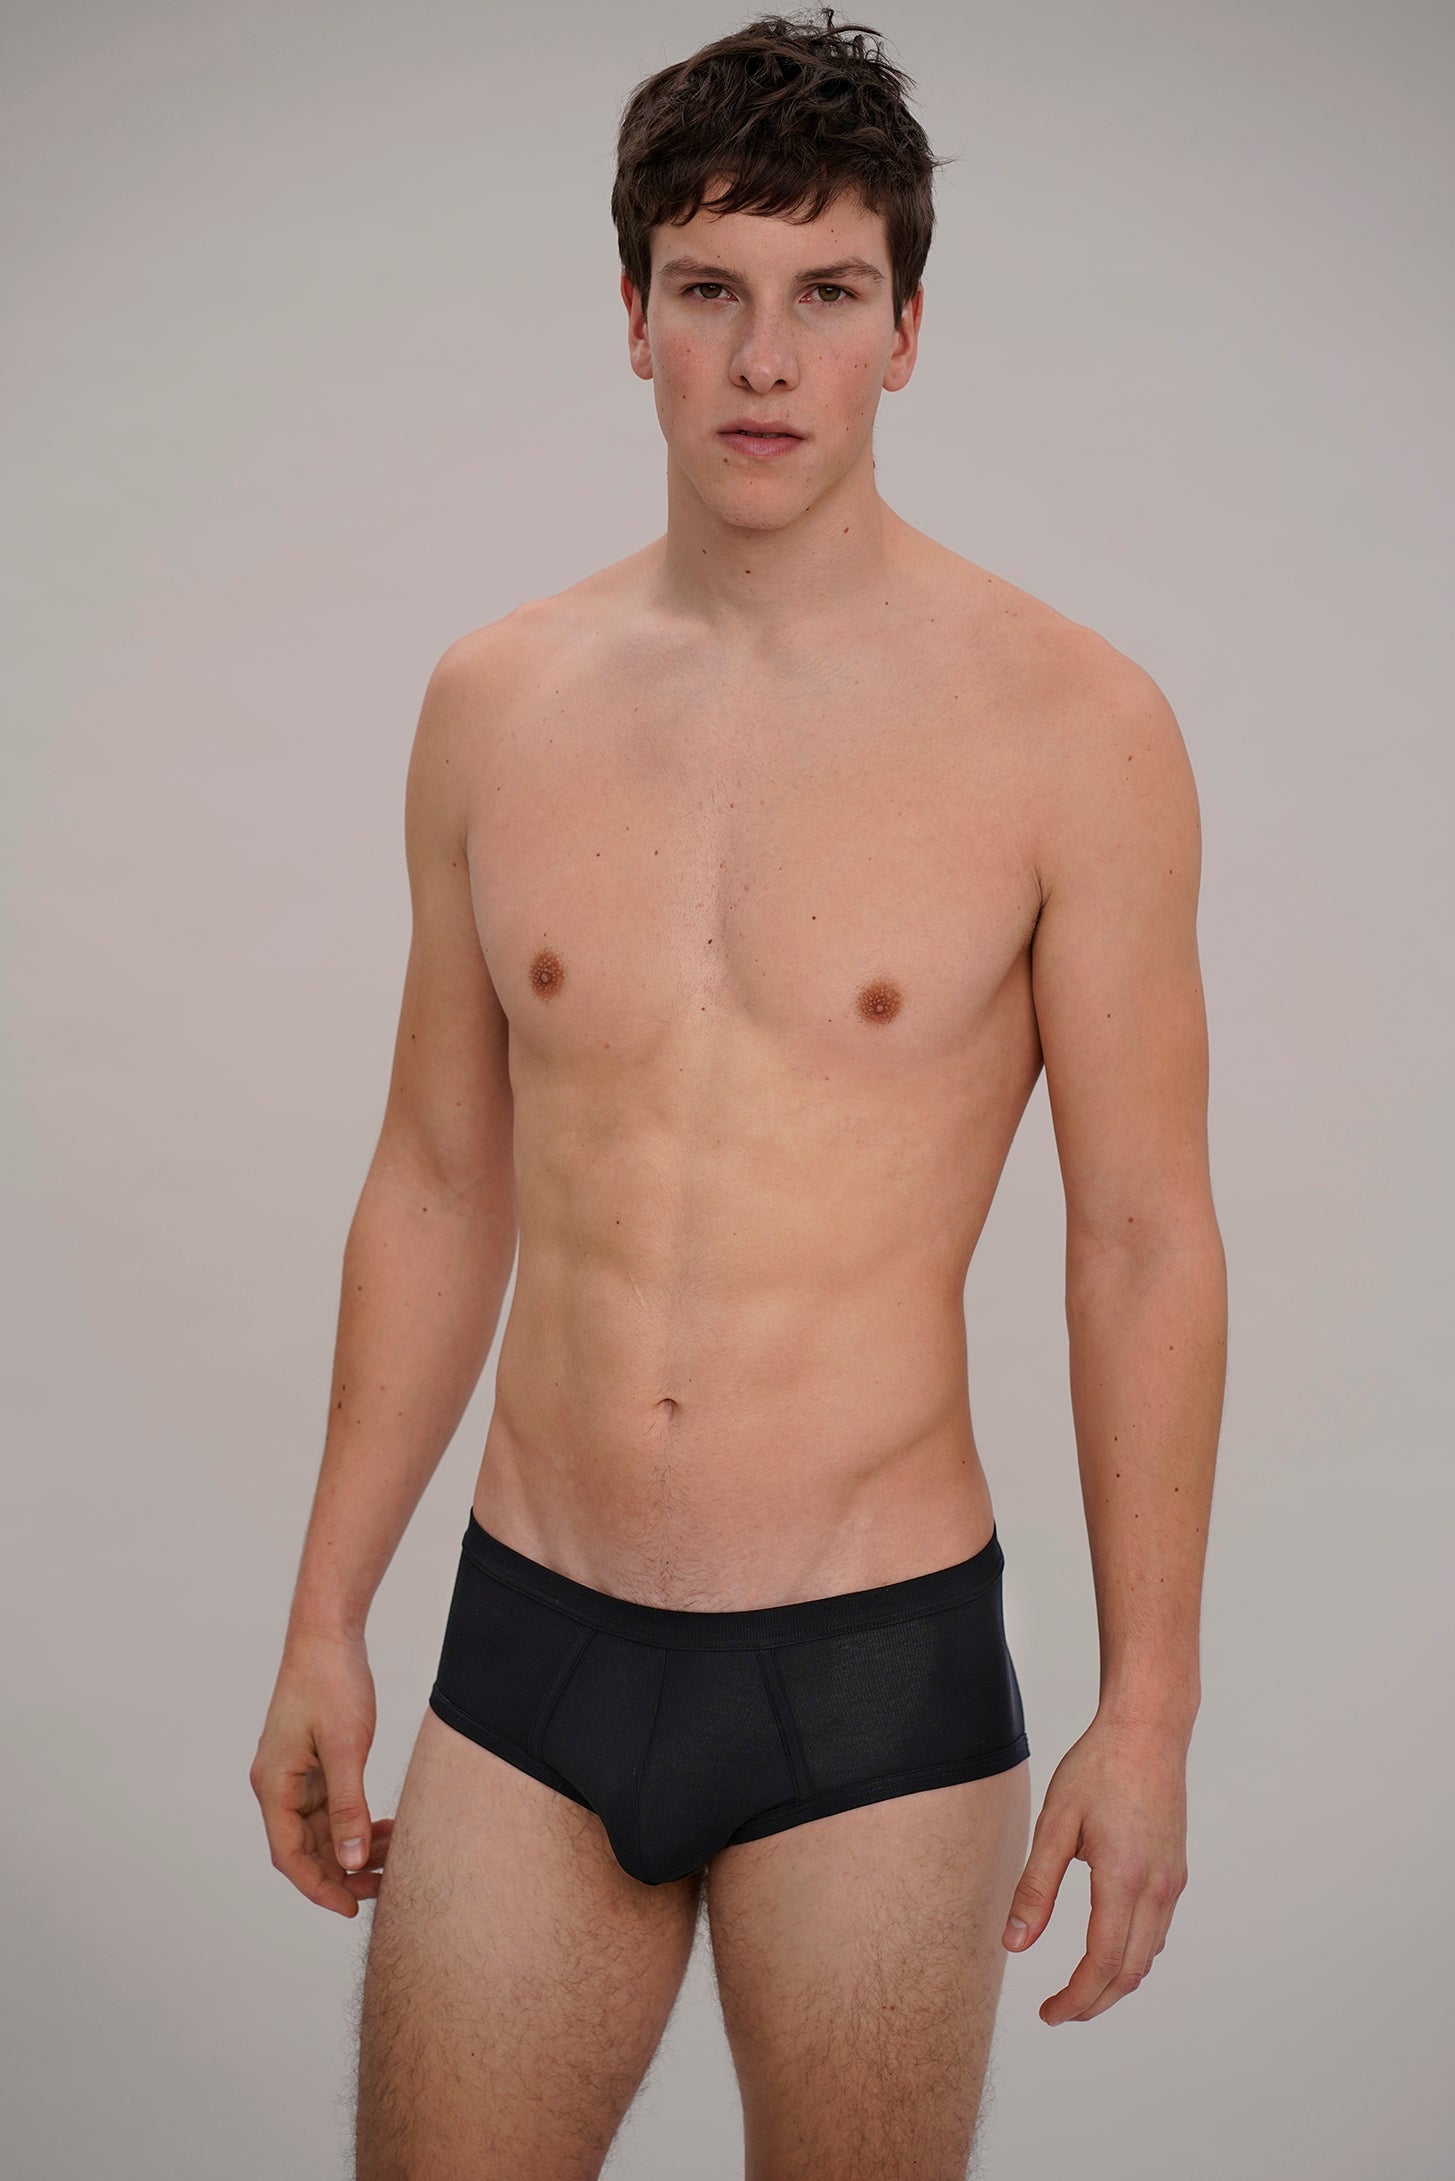 Briefs / underpants in black made from natural MicroModal from moi-basics